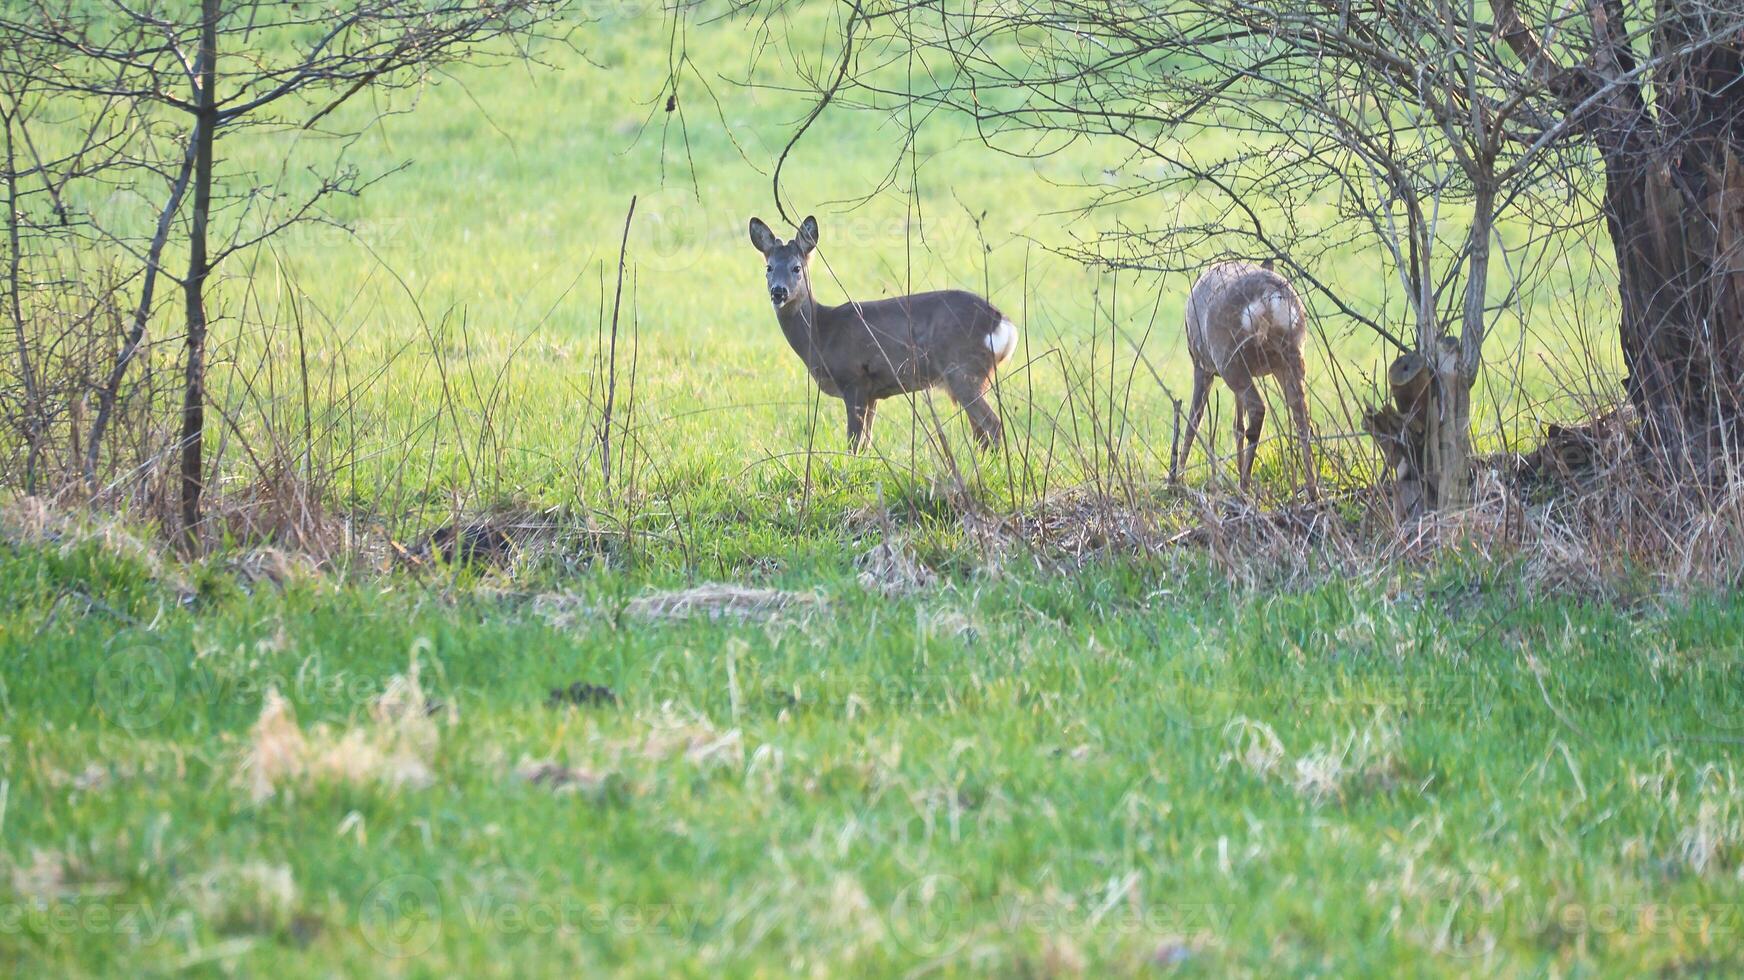 Deer at a meadow, attentive and feeding. Hidden among the bushes. Animal photo